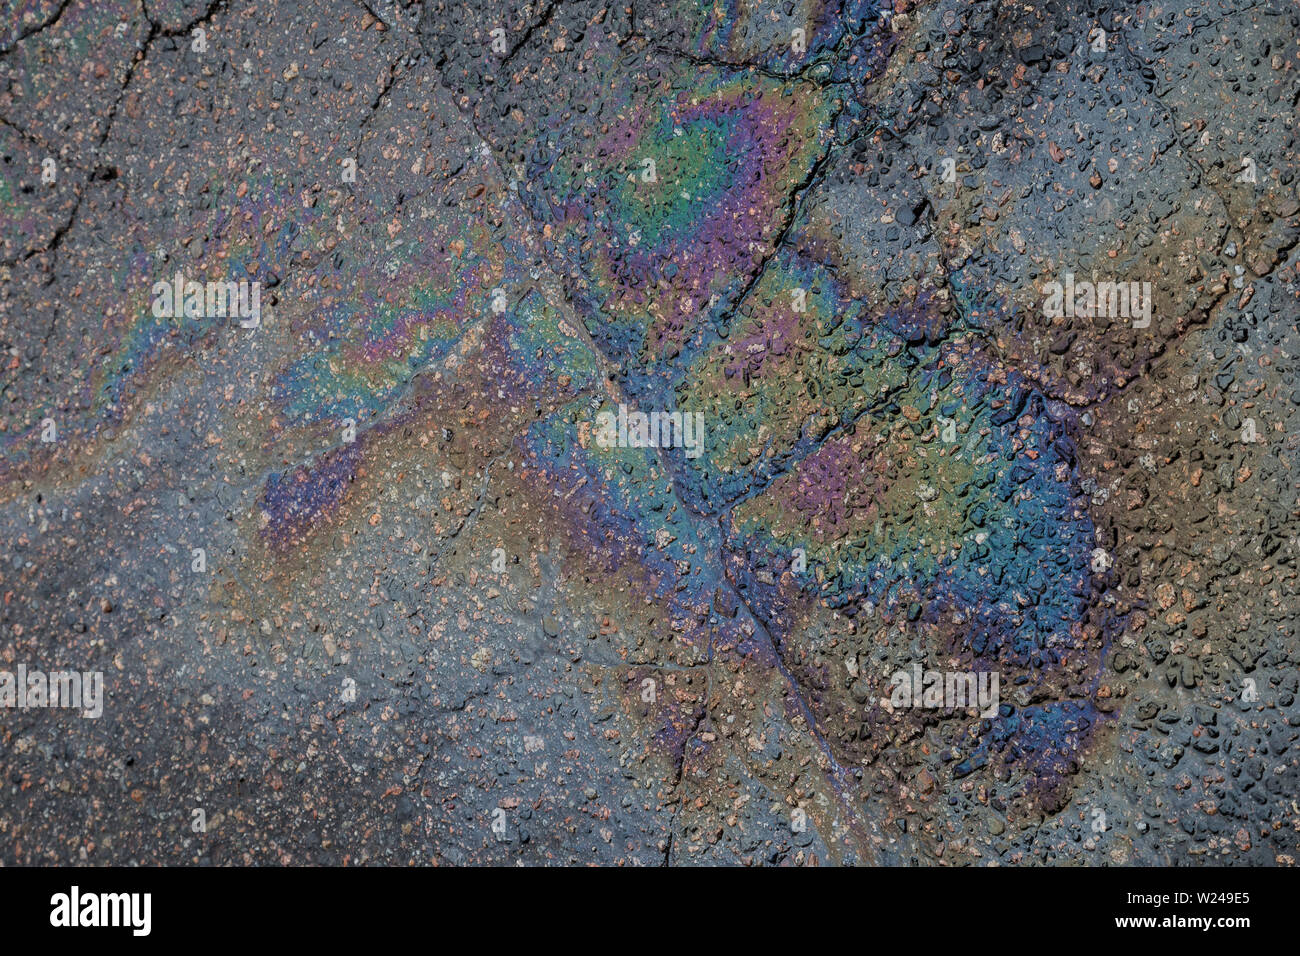 Close-up of an iridescent oil or gasoline spill on a wet asphalt, viewed from above. Top view. Stock Photo